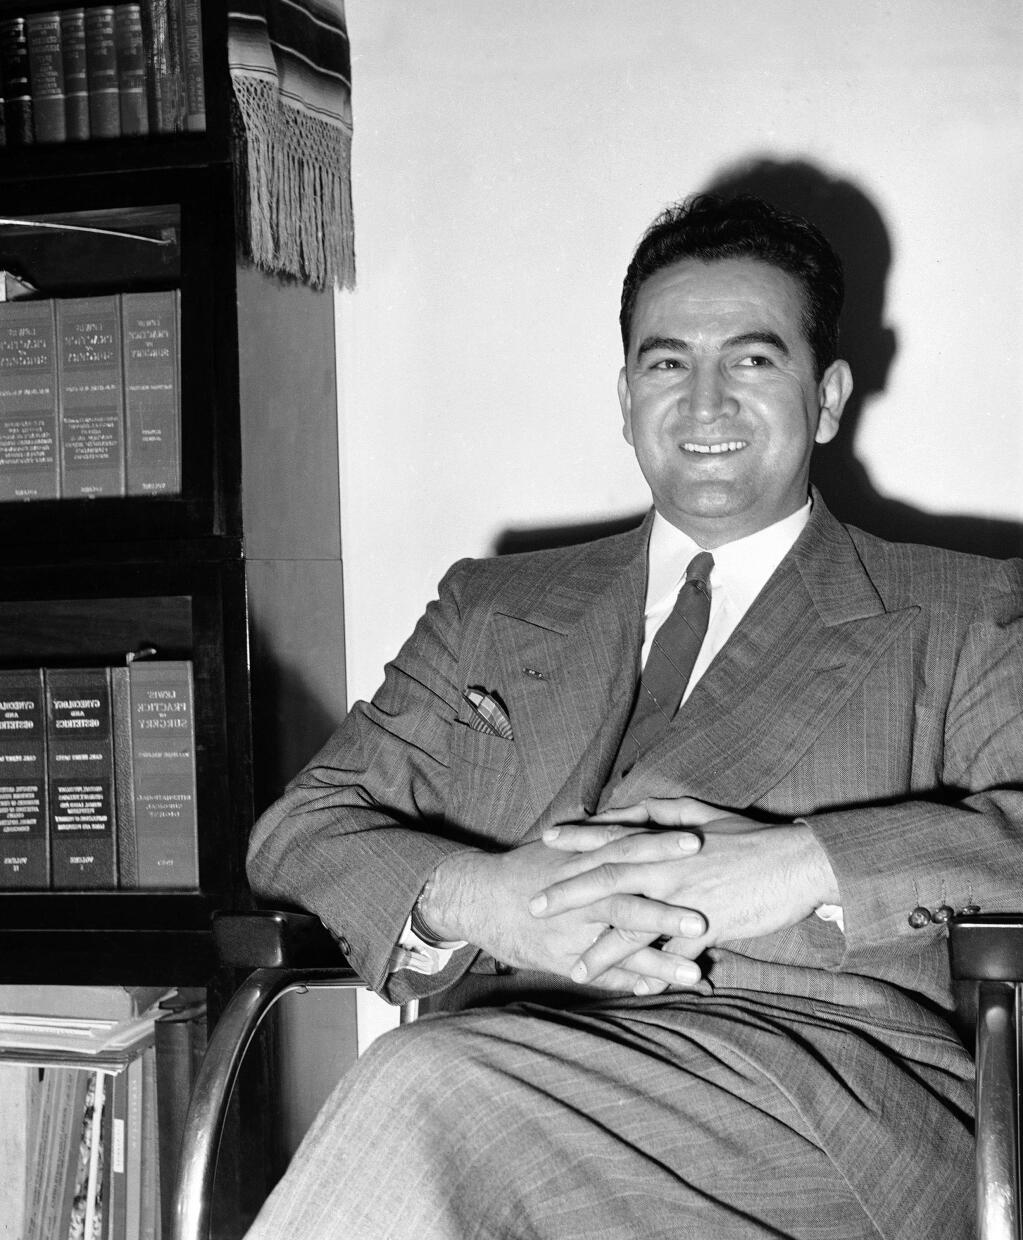 FILE - This May 2, 1949, file photo shows physician and surgeon Dr. Hector Perez Garcia, whose goal was to fight for a better deal for U.S. Latin American citizens, in Corpus Christi, Texas. The office of 4, where the Mexican American civil rights movement was sparked, is gone and is an example that many Latino historical preservation advocates say shows more needs to be done to save sites linked to Latino history. (AP Photo/File)